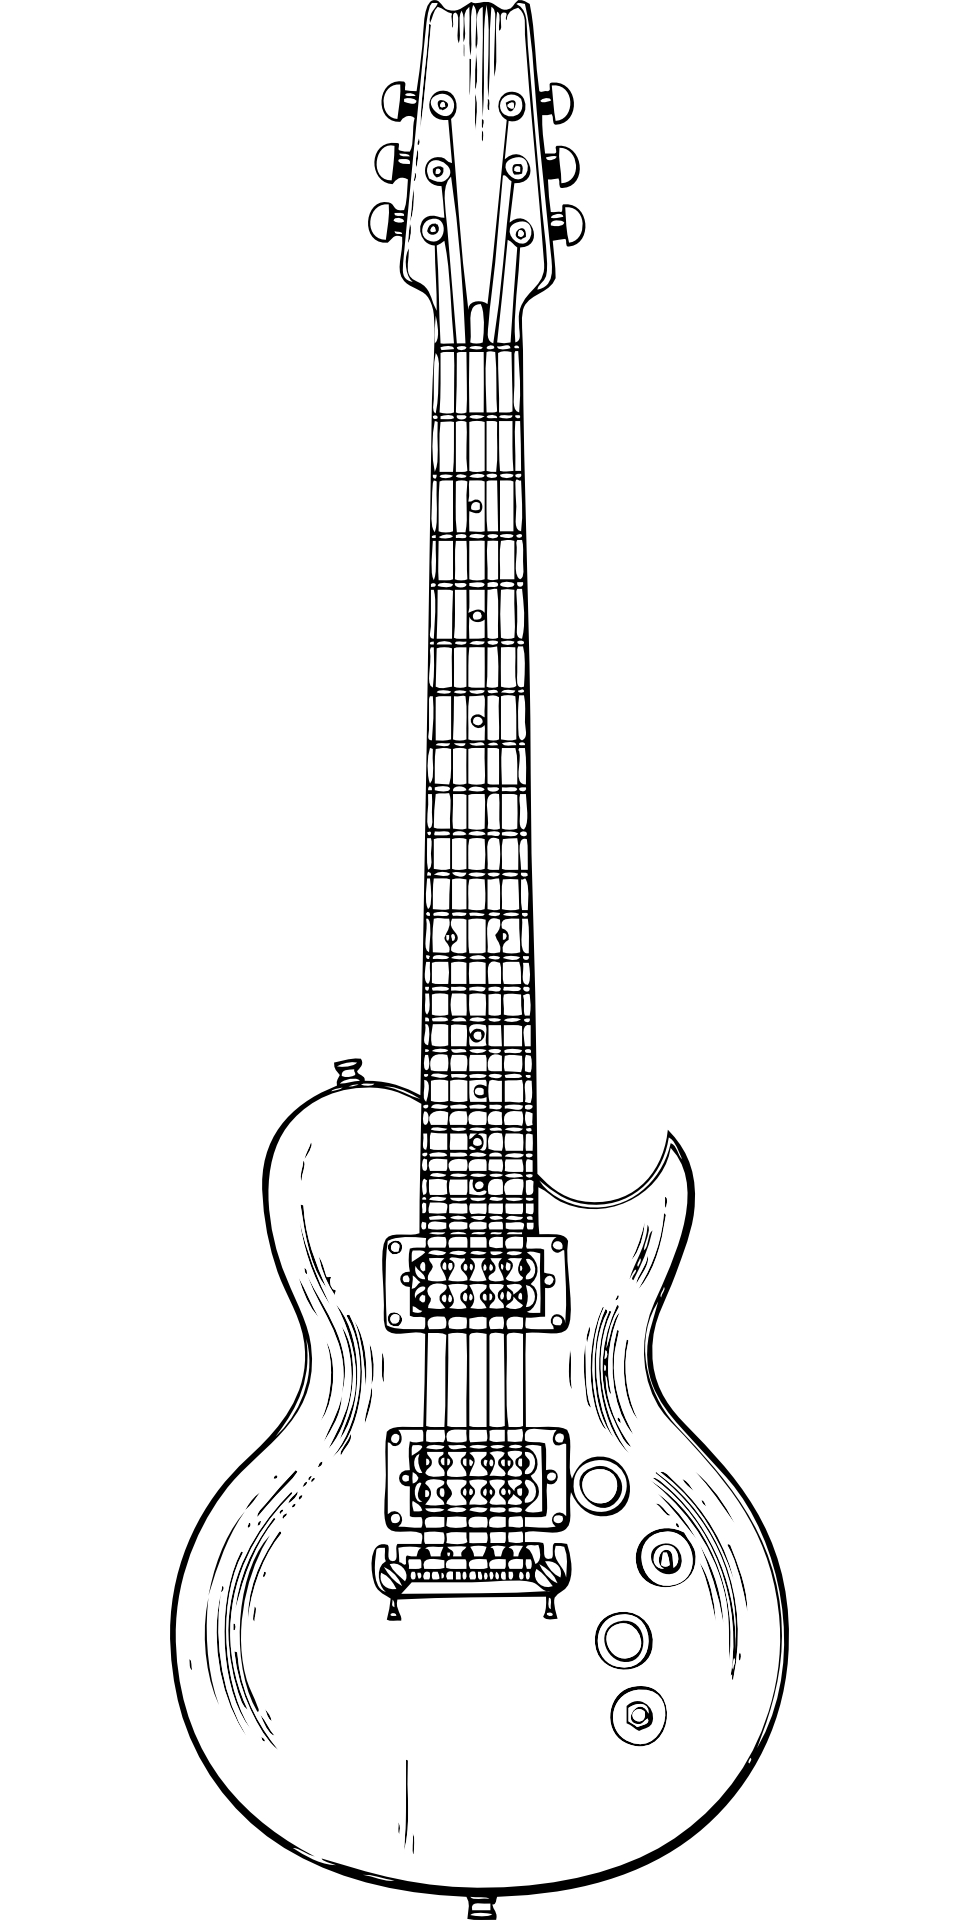 Musical instrument-electric guitar outline vector